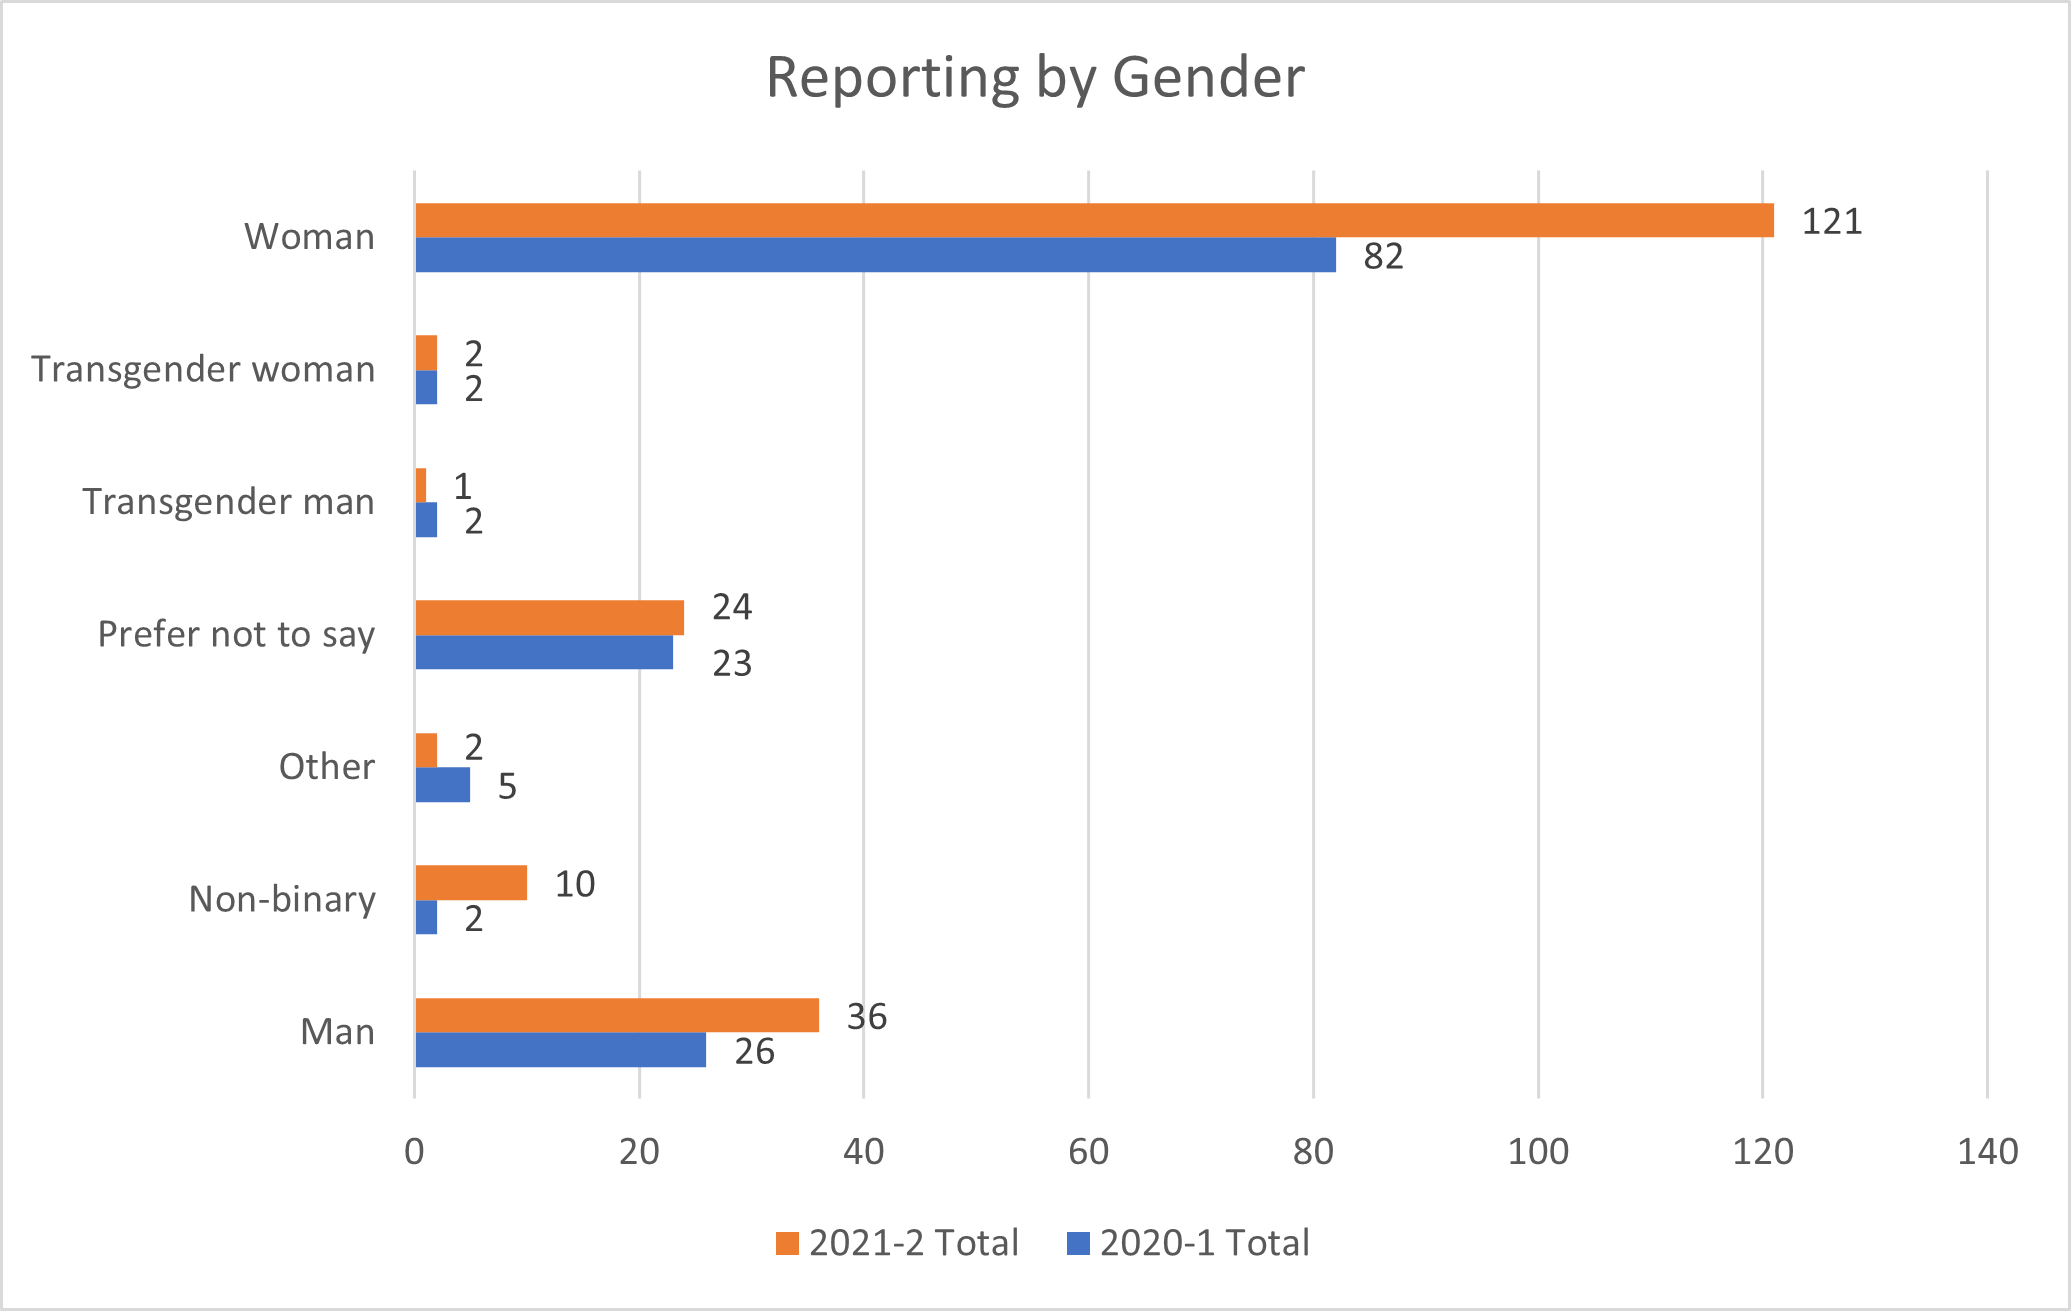 Data on reporting by gender